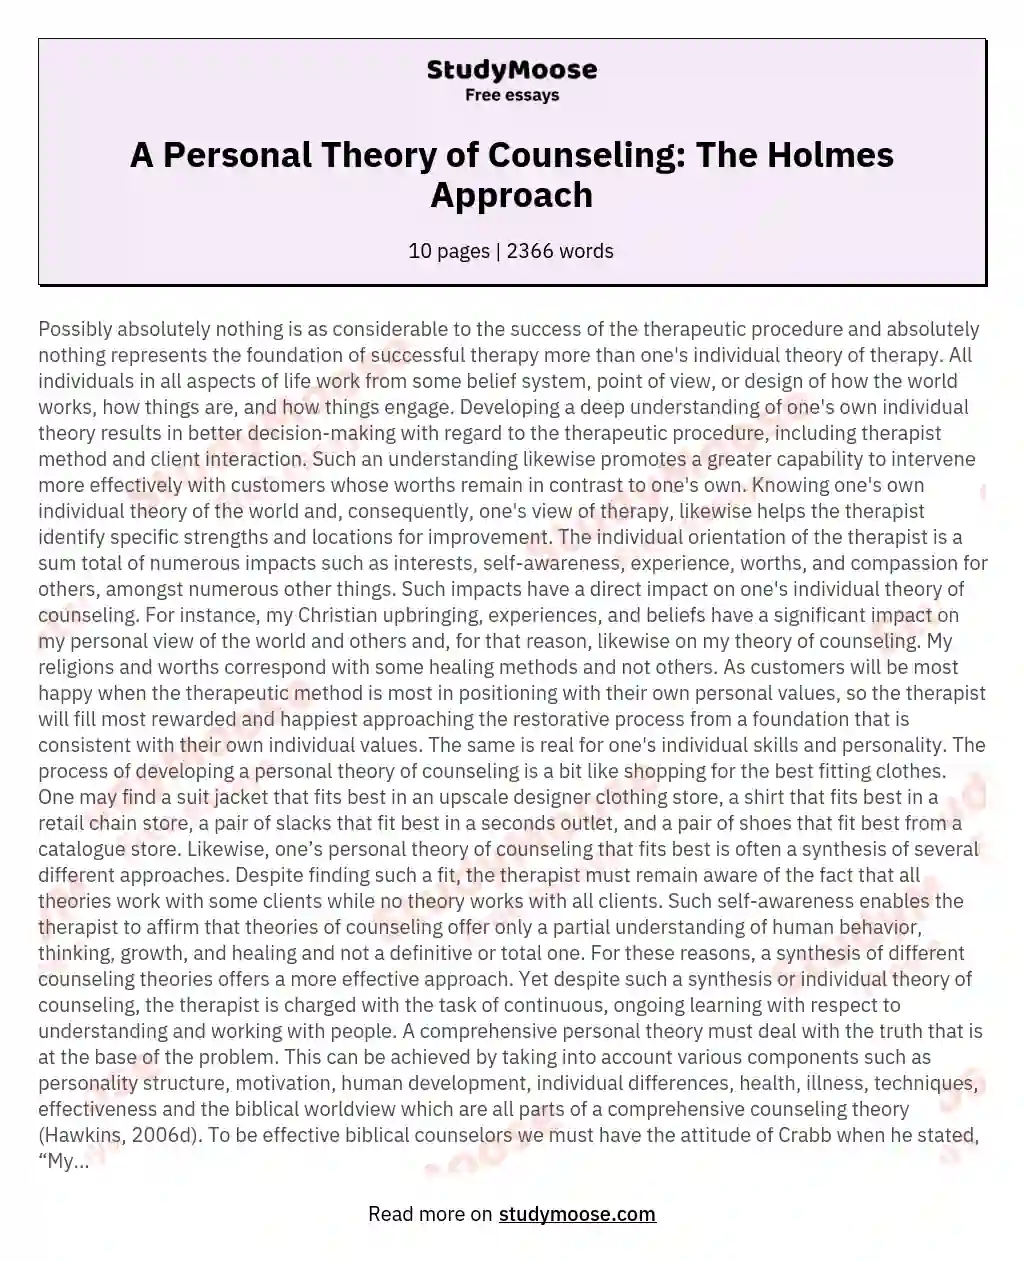 A Personal Theory of Counseling: The Holmes Approach essay